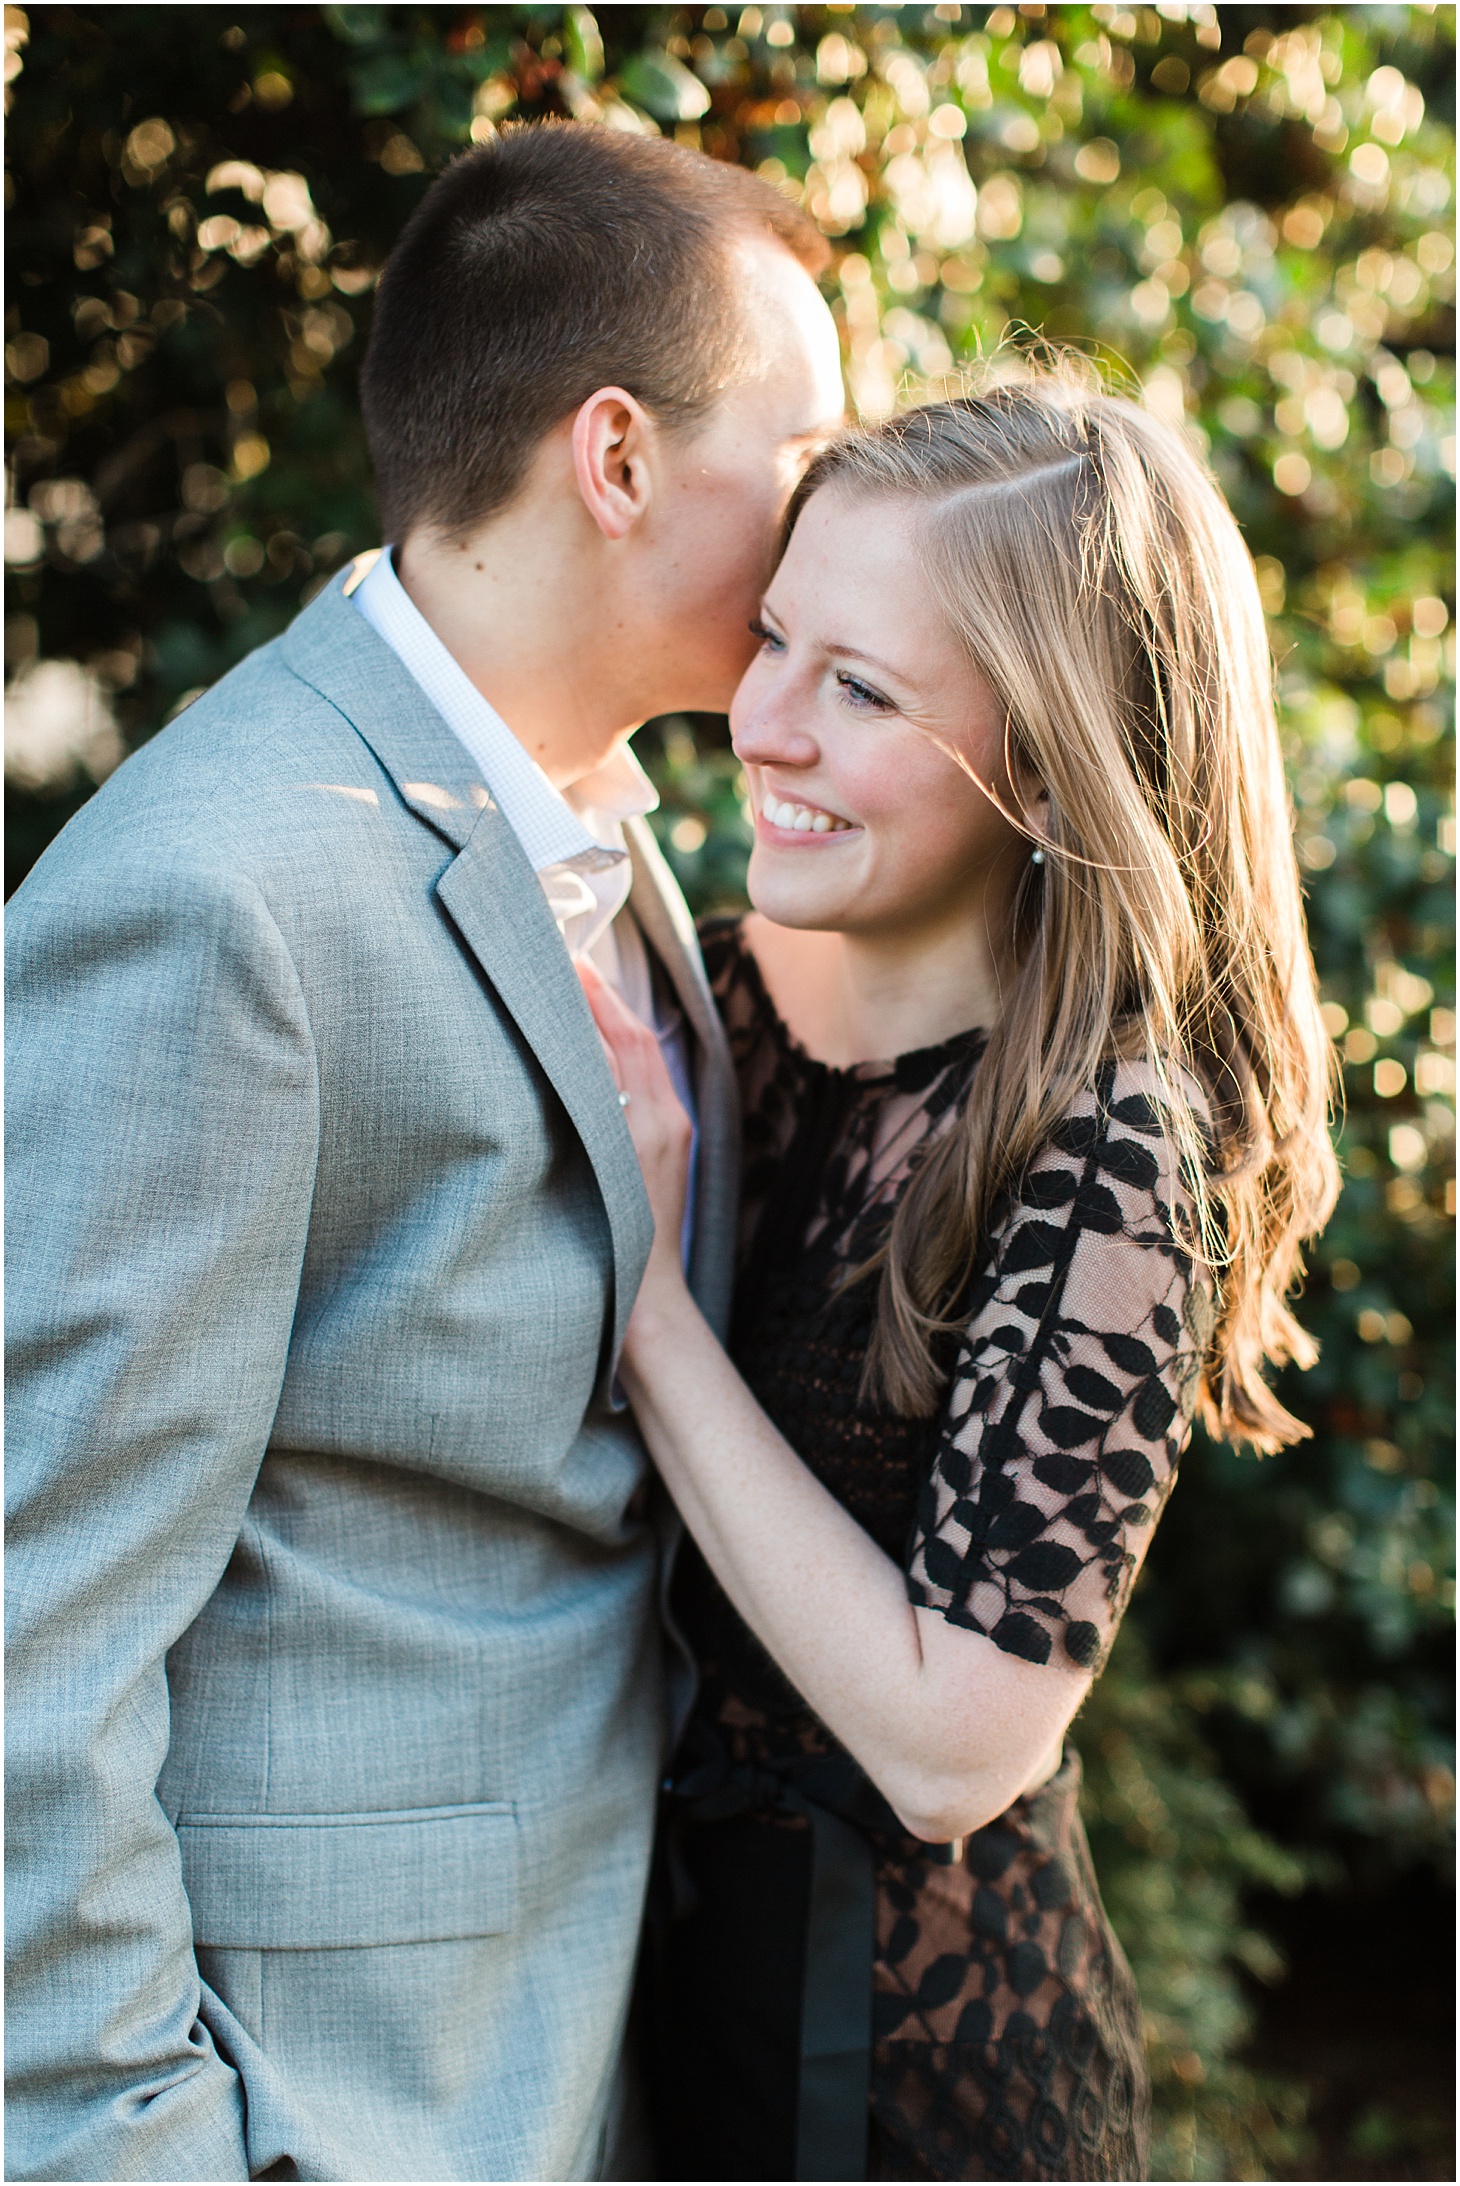 Morning Engagement Portraits in Washington, DC | Jefferson Memorial and Georgetown Sunrise Engagement Session | Sarah Bradshaw Photography